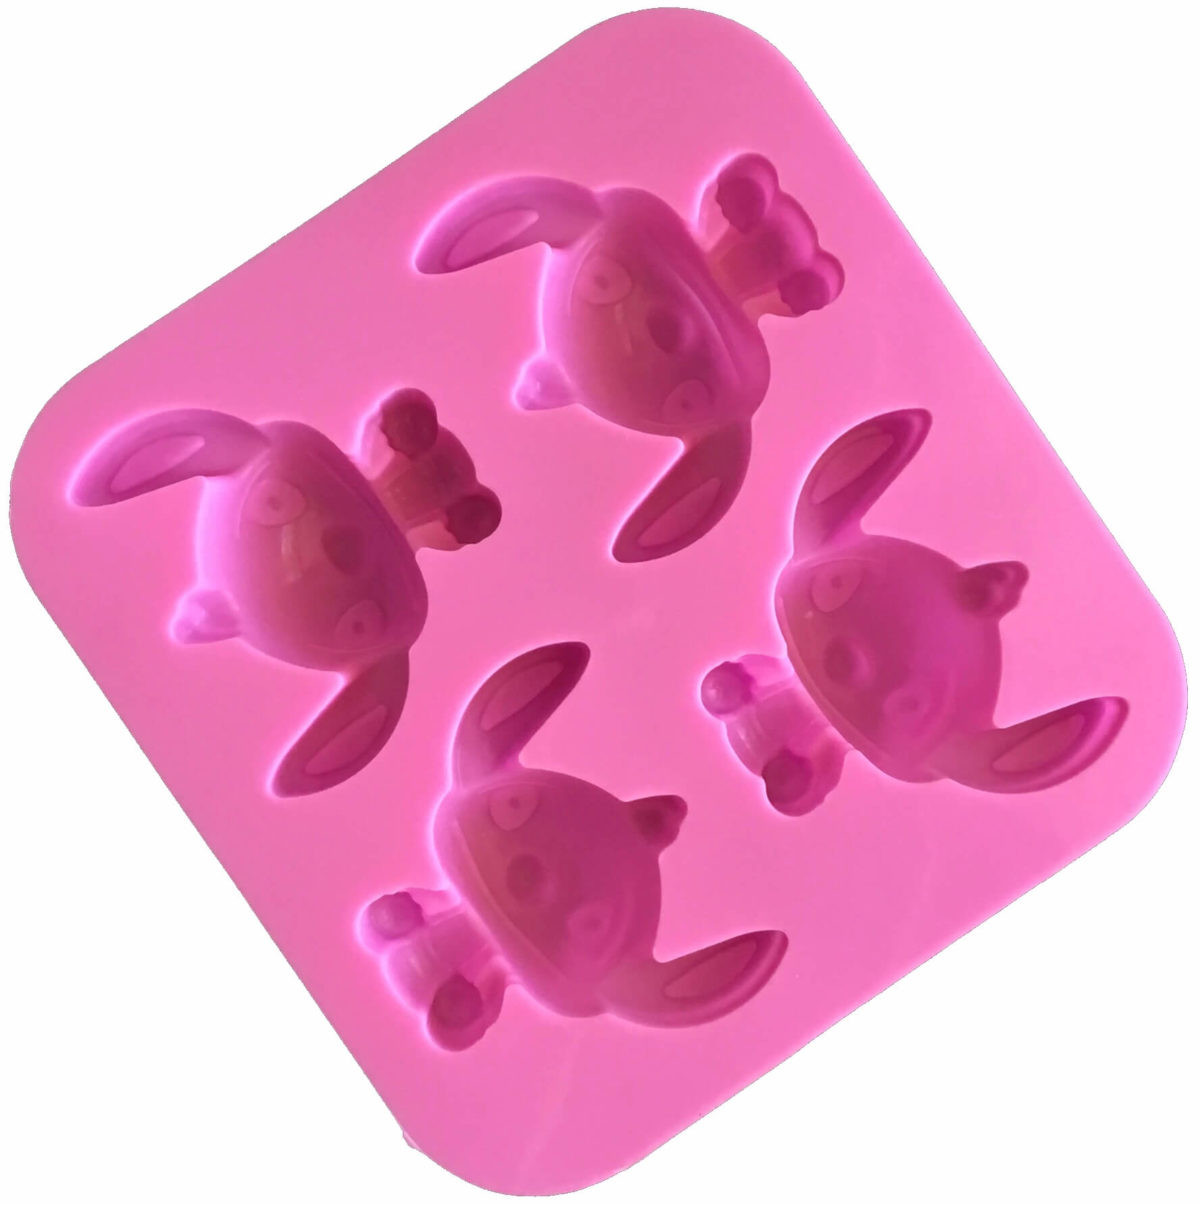 back of pink four cavity silicone mould with identical alien stich cavites